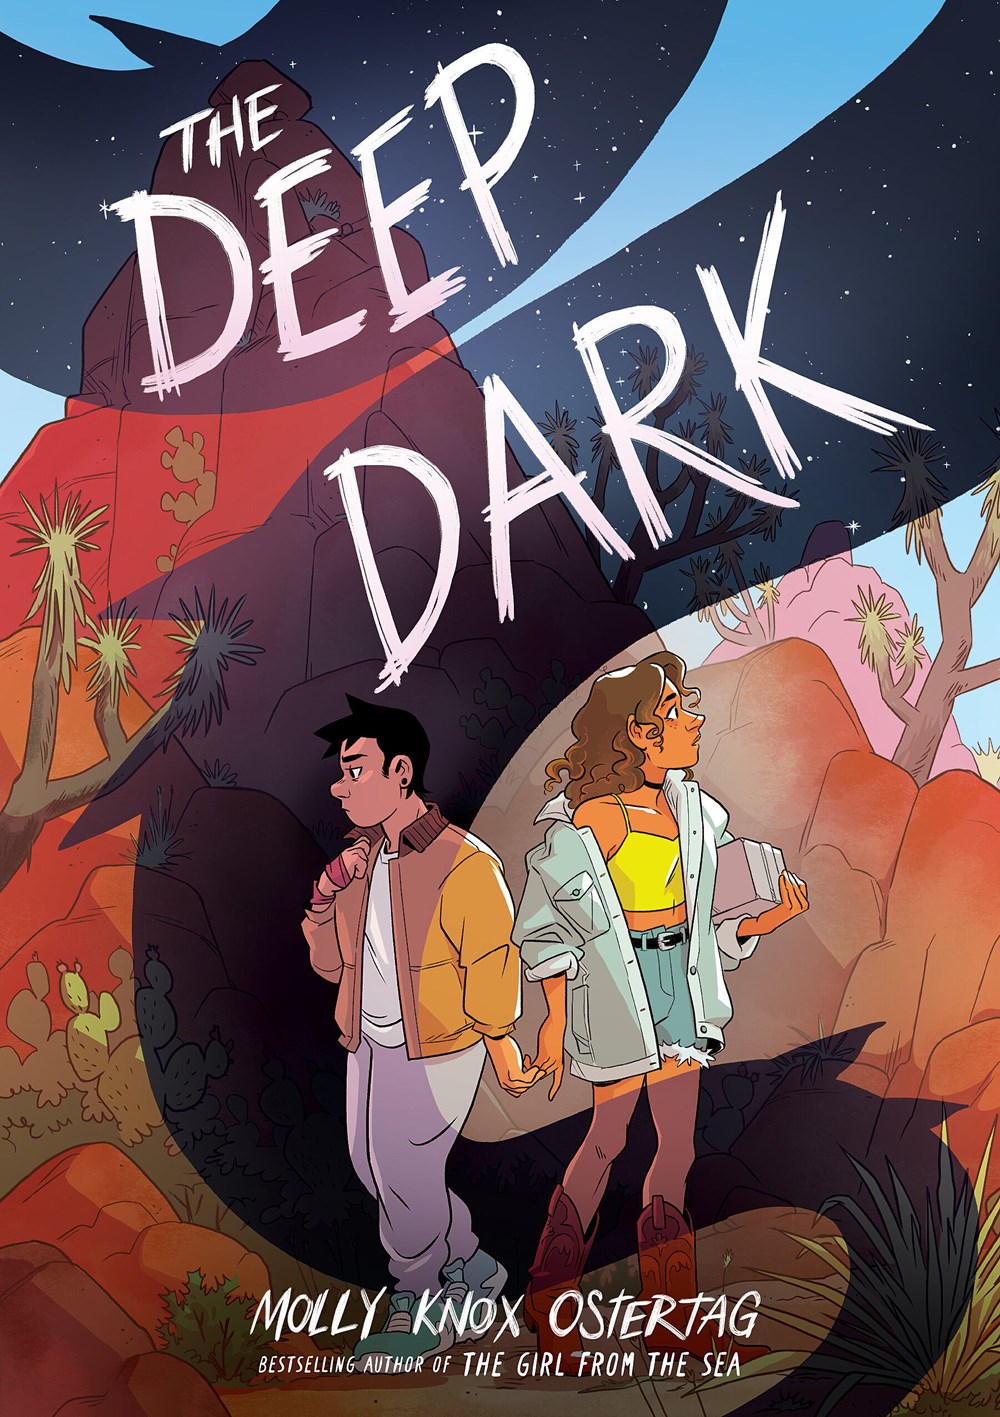 Giveaway: THE DEEP DARK (Molly Knox Ostertag)~ US/CAN ONLY!